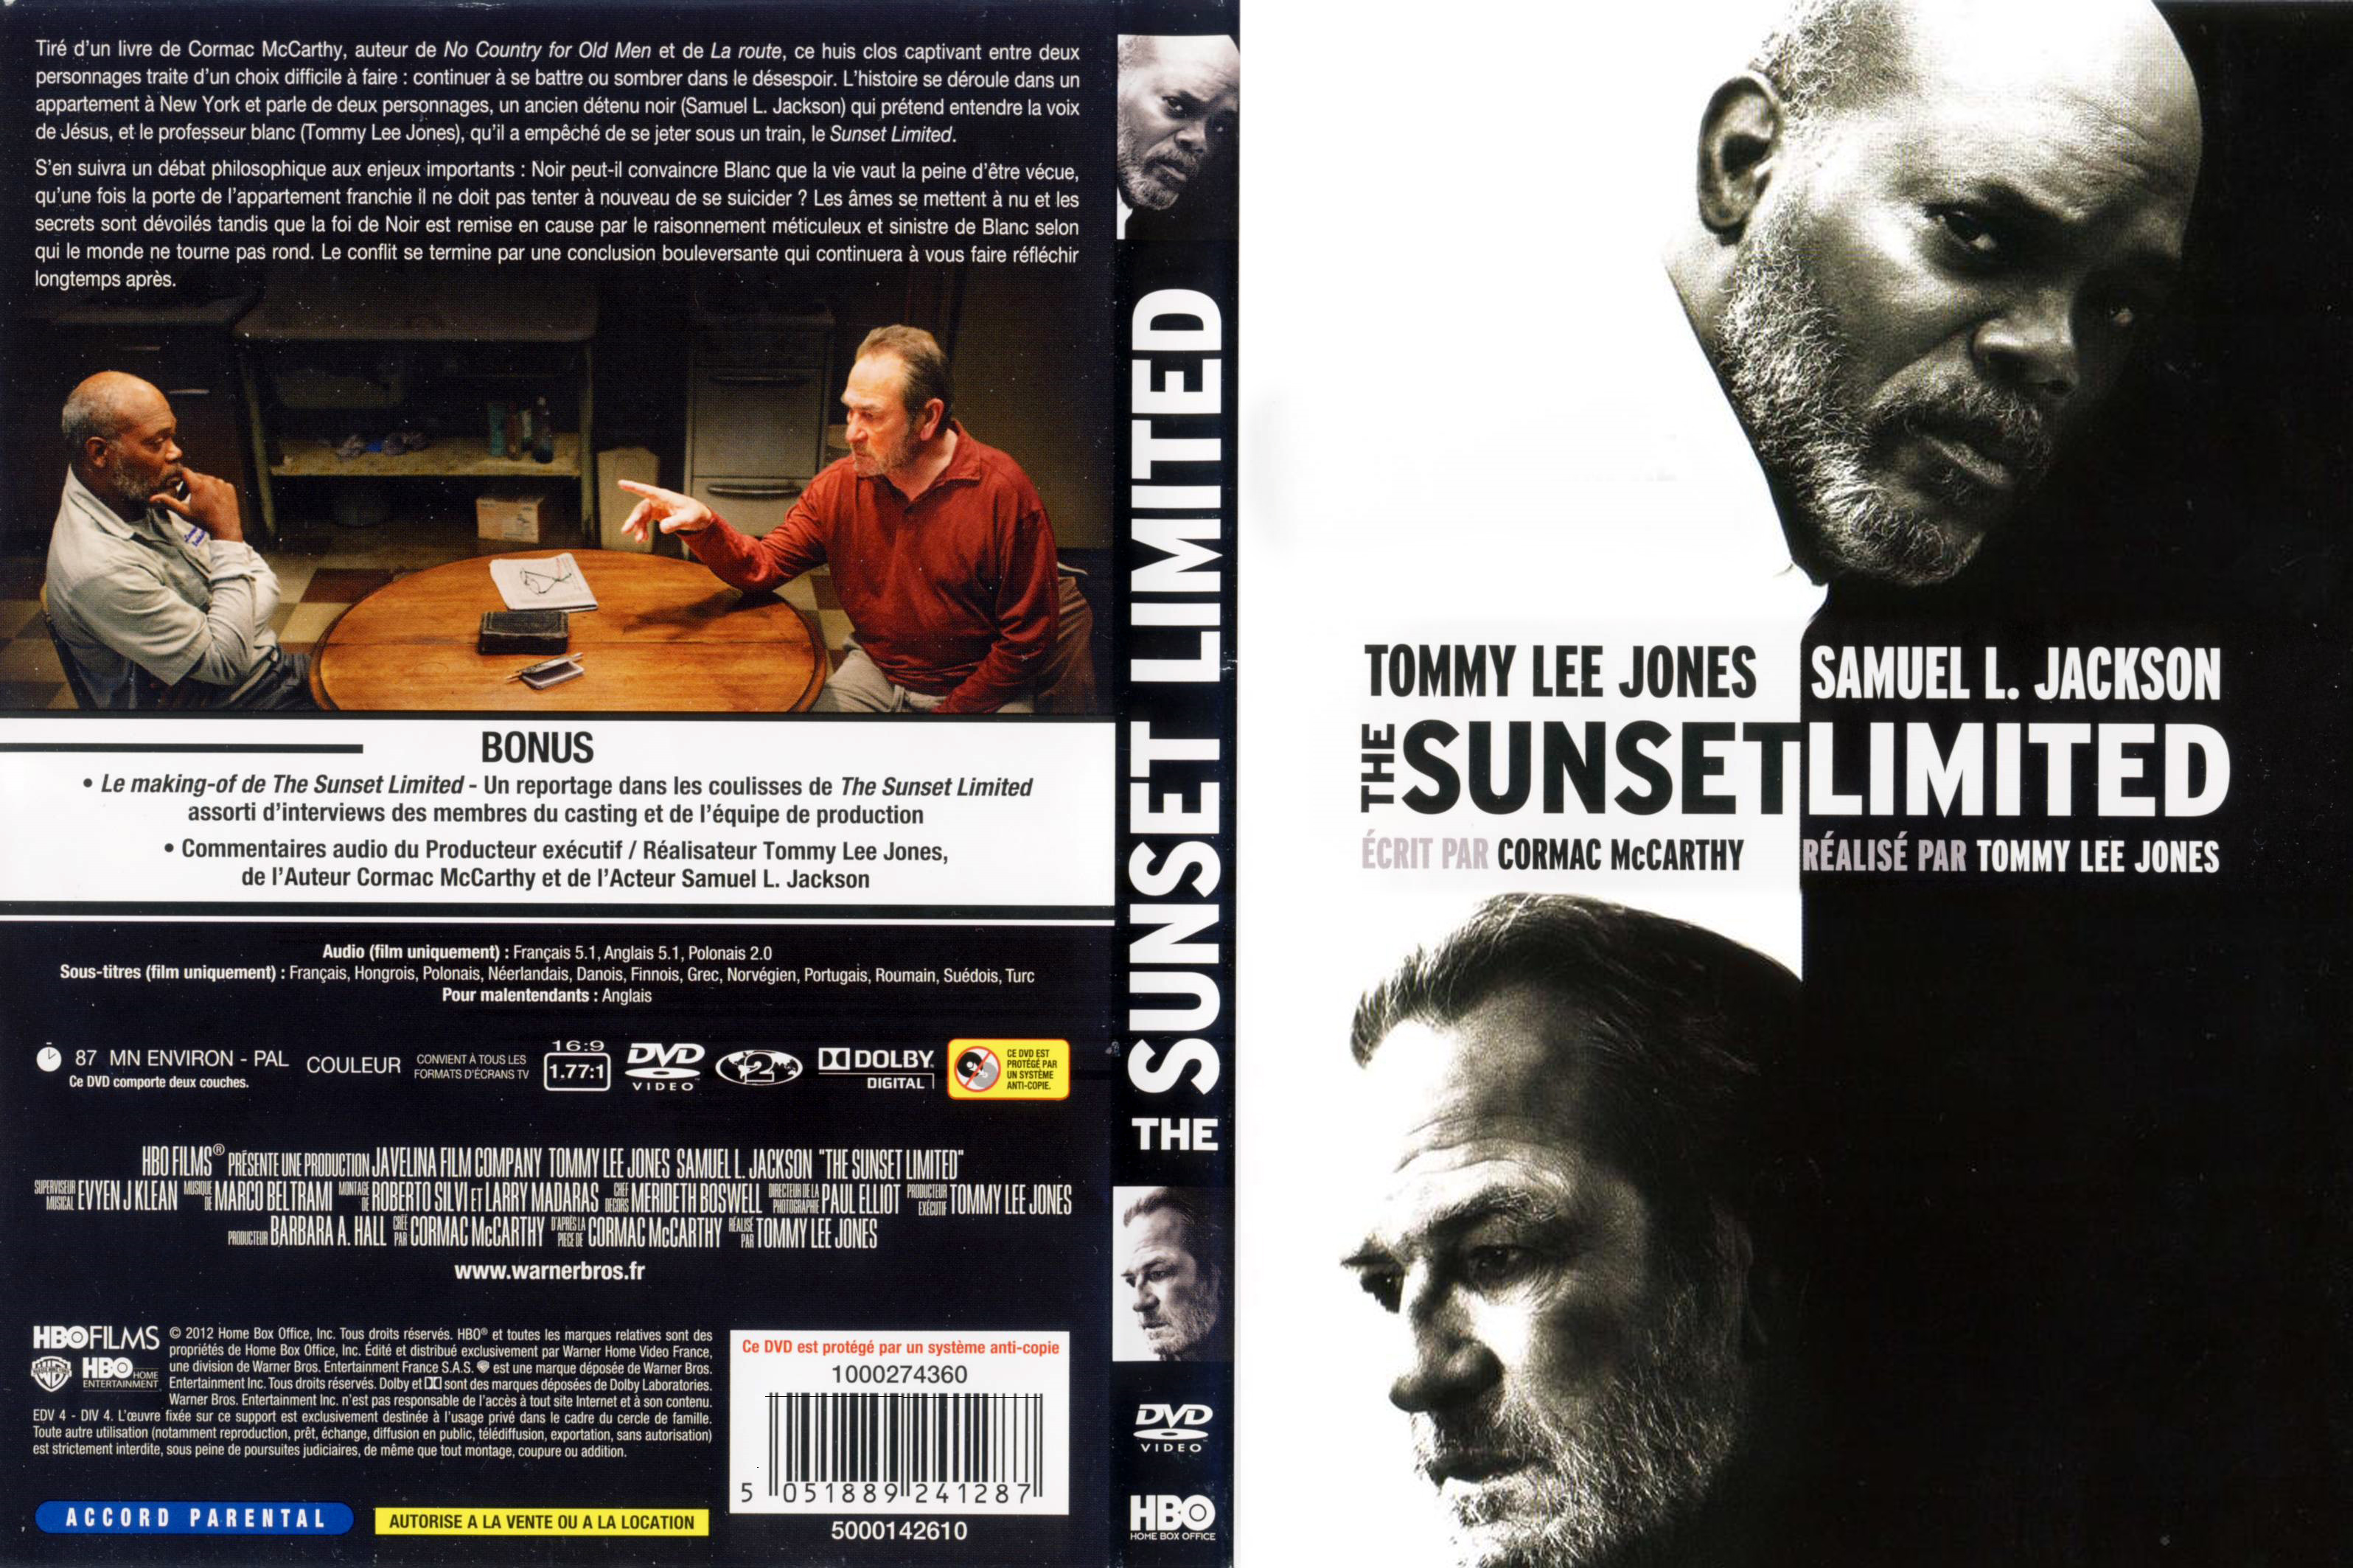 Jaquette DVD The Sunset Limited